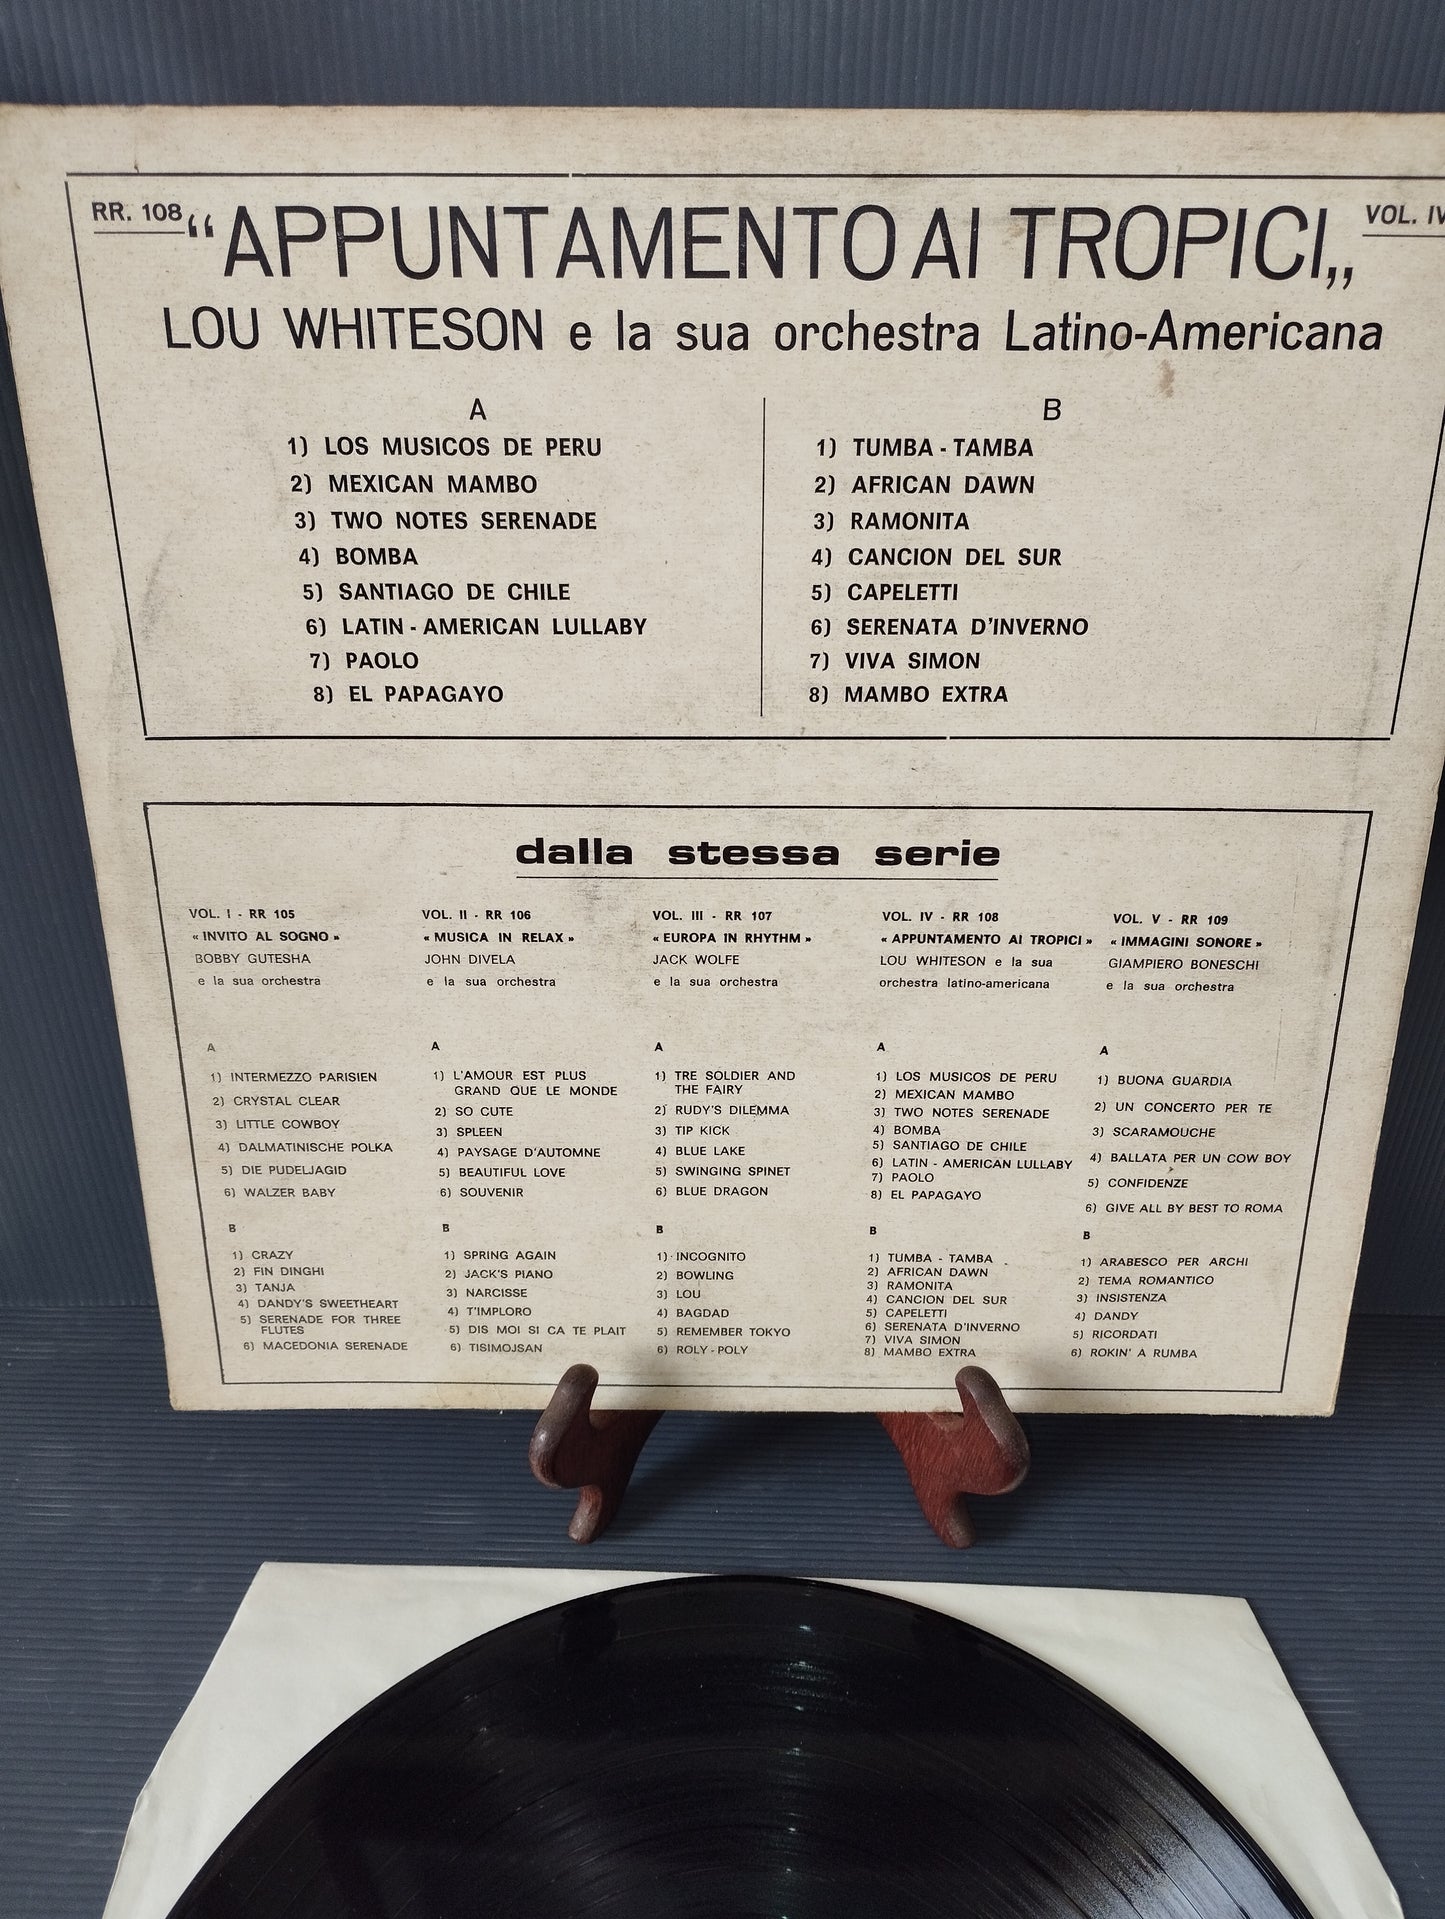 Appointment in the Tropics Vol.IV" Lou Whiteson Lp 33 rpm

 Published in 1966 by Radio Records